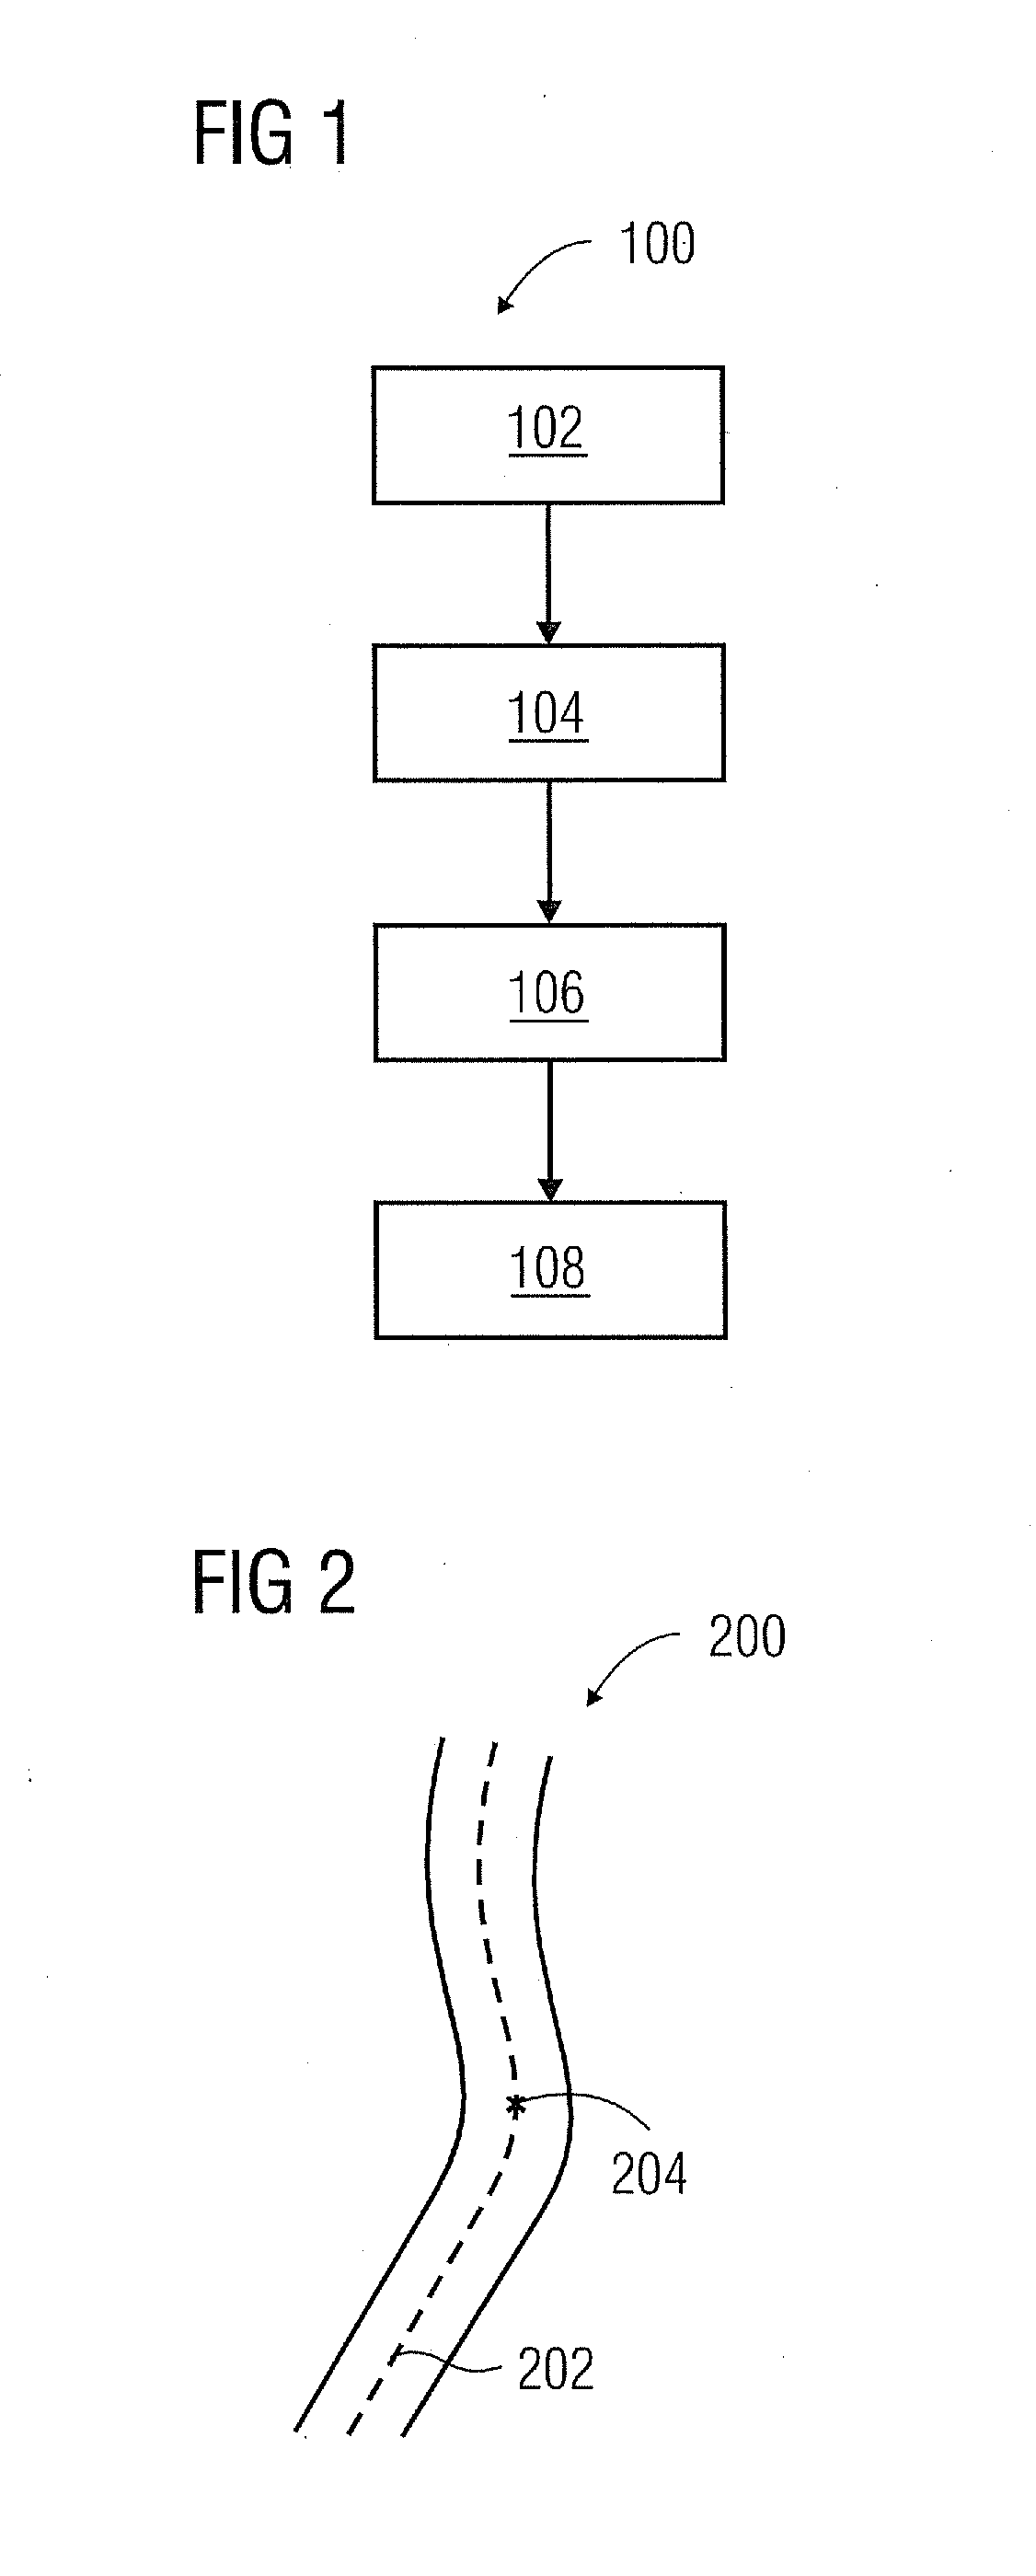 Method for Determining Properties of a Vessel in a Medical Image